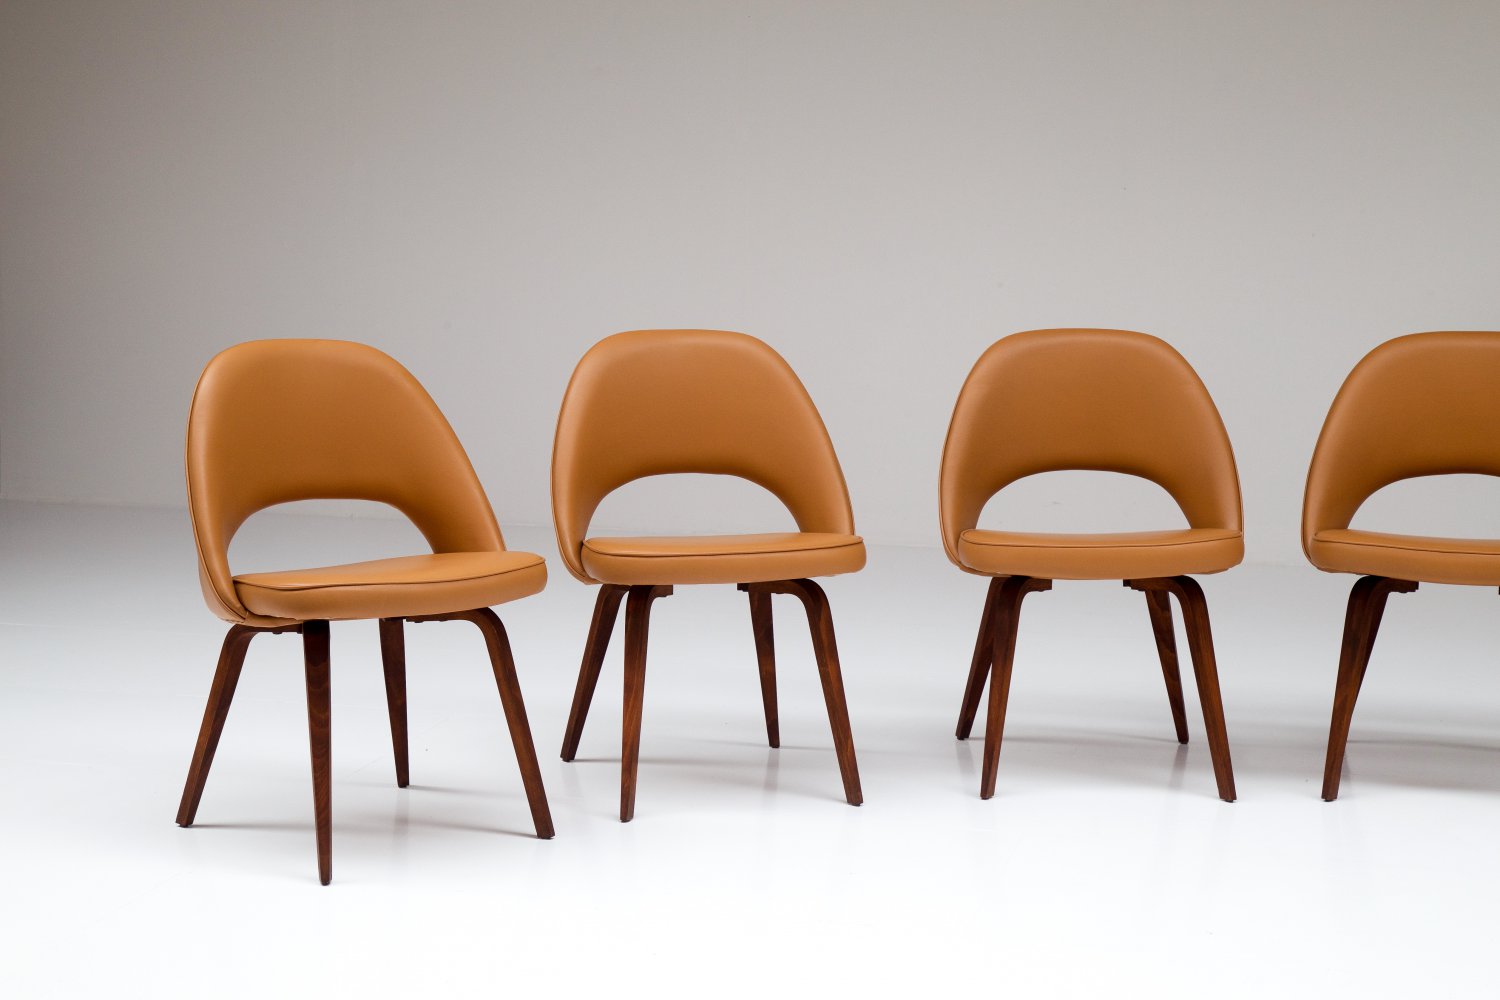 Large set of conference chairs by Eero Saarinen for Knoll